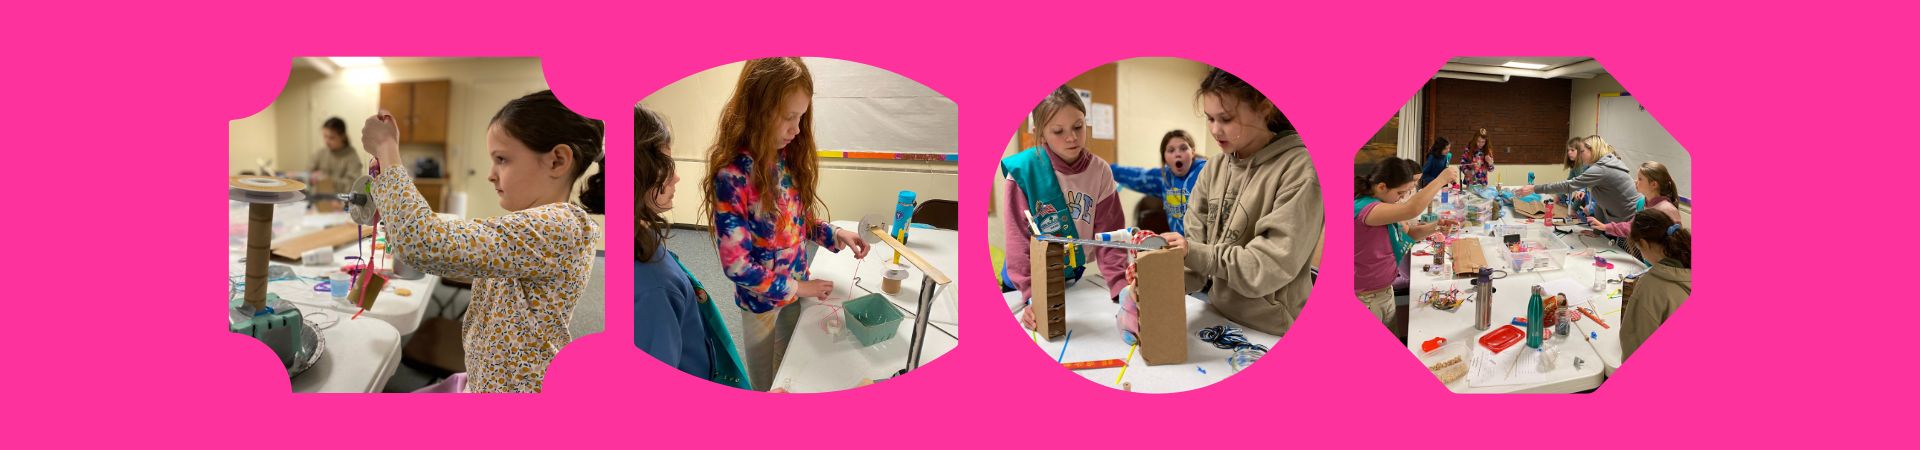  Girl Scouts building cranes and pulleys from recycled objects 